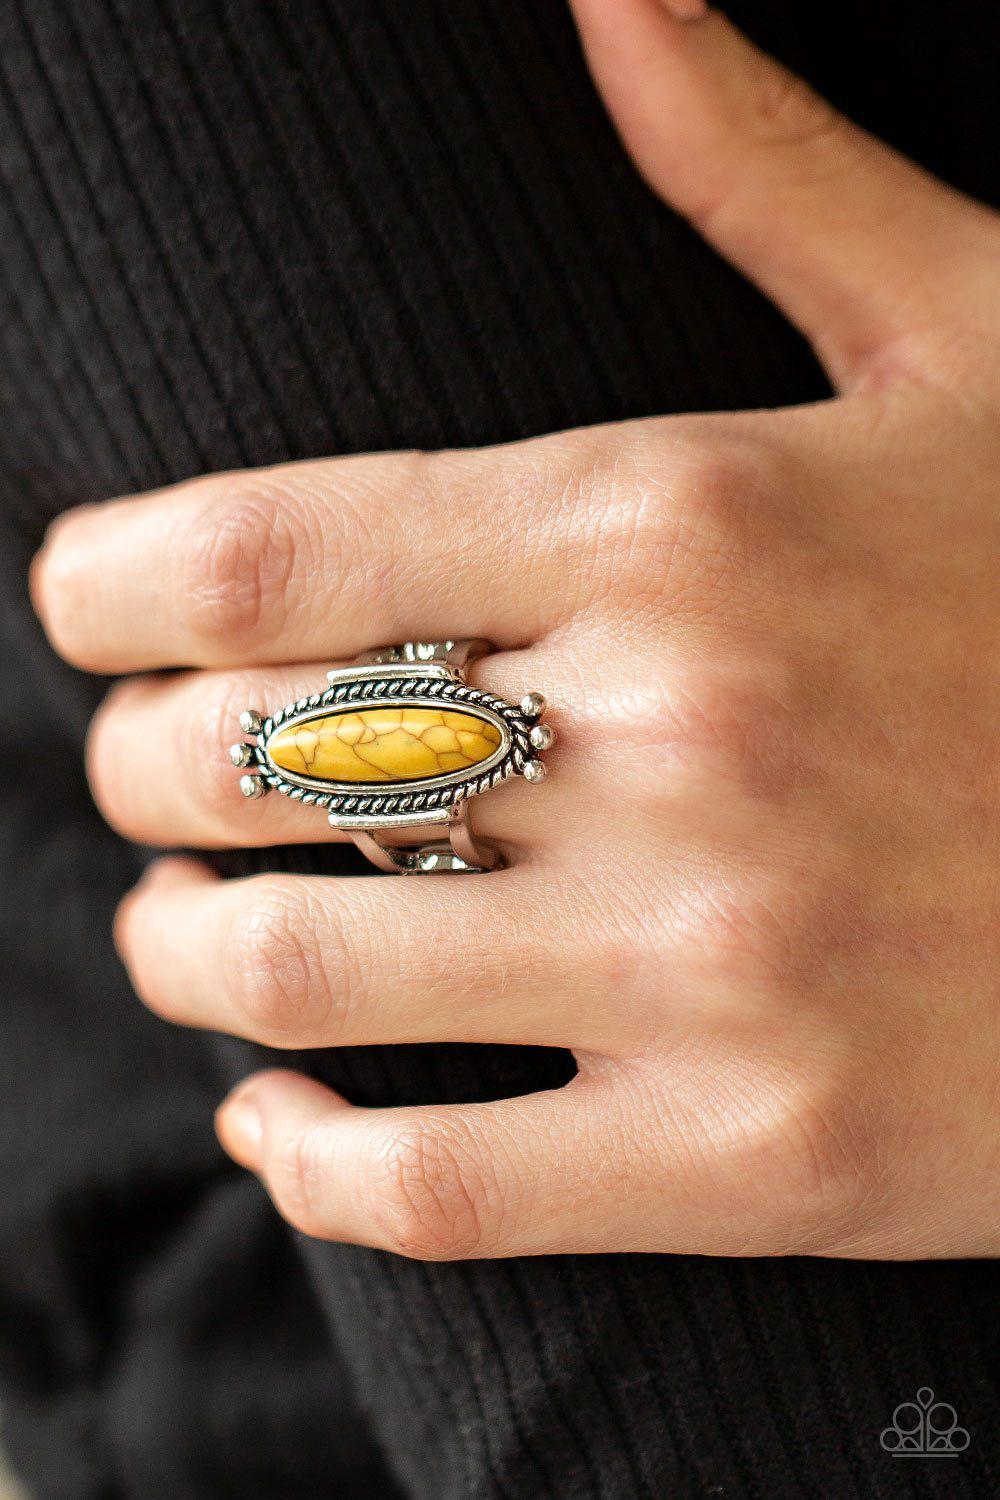 Sahara Escape Yellow Stone Ring - Paparazzi Accessories- model - CarasShop.com - $5 Jewelry by Cara Jewels